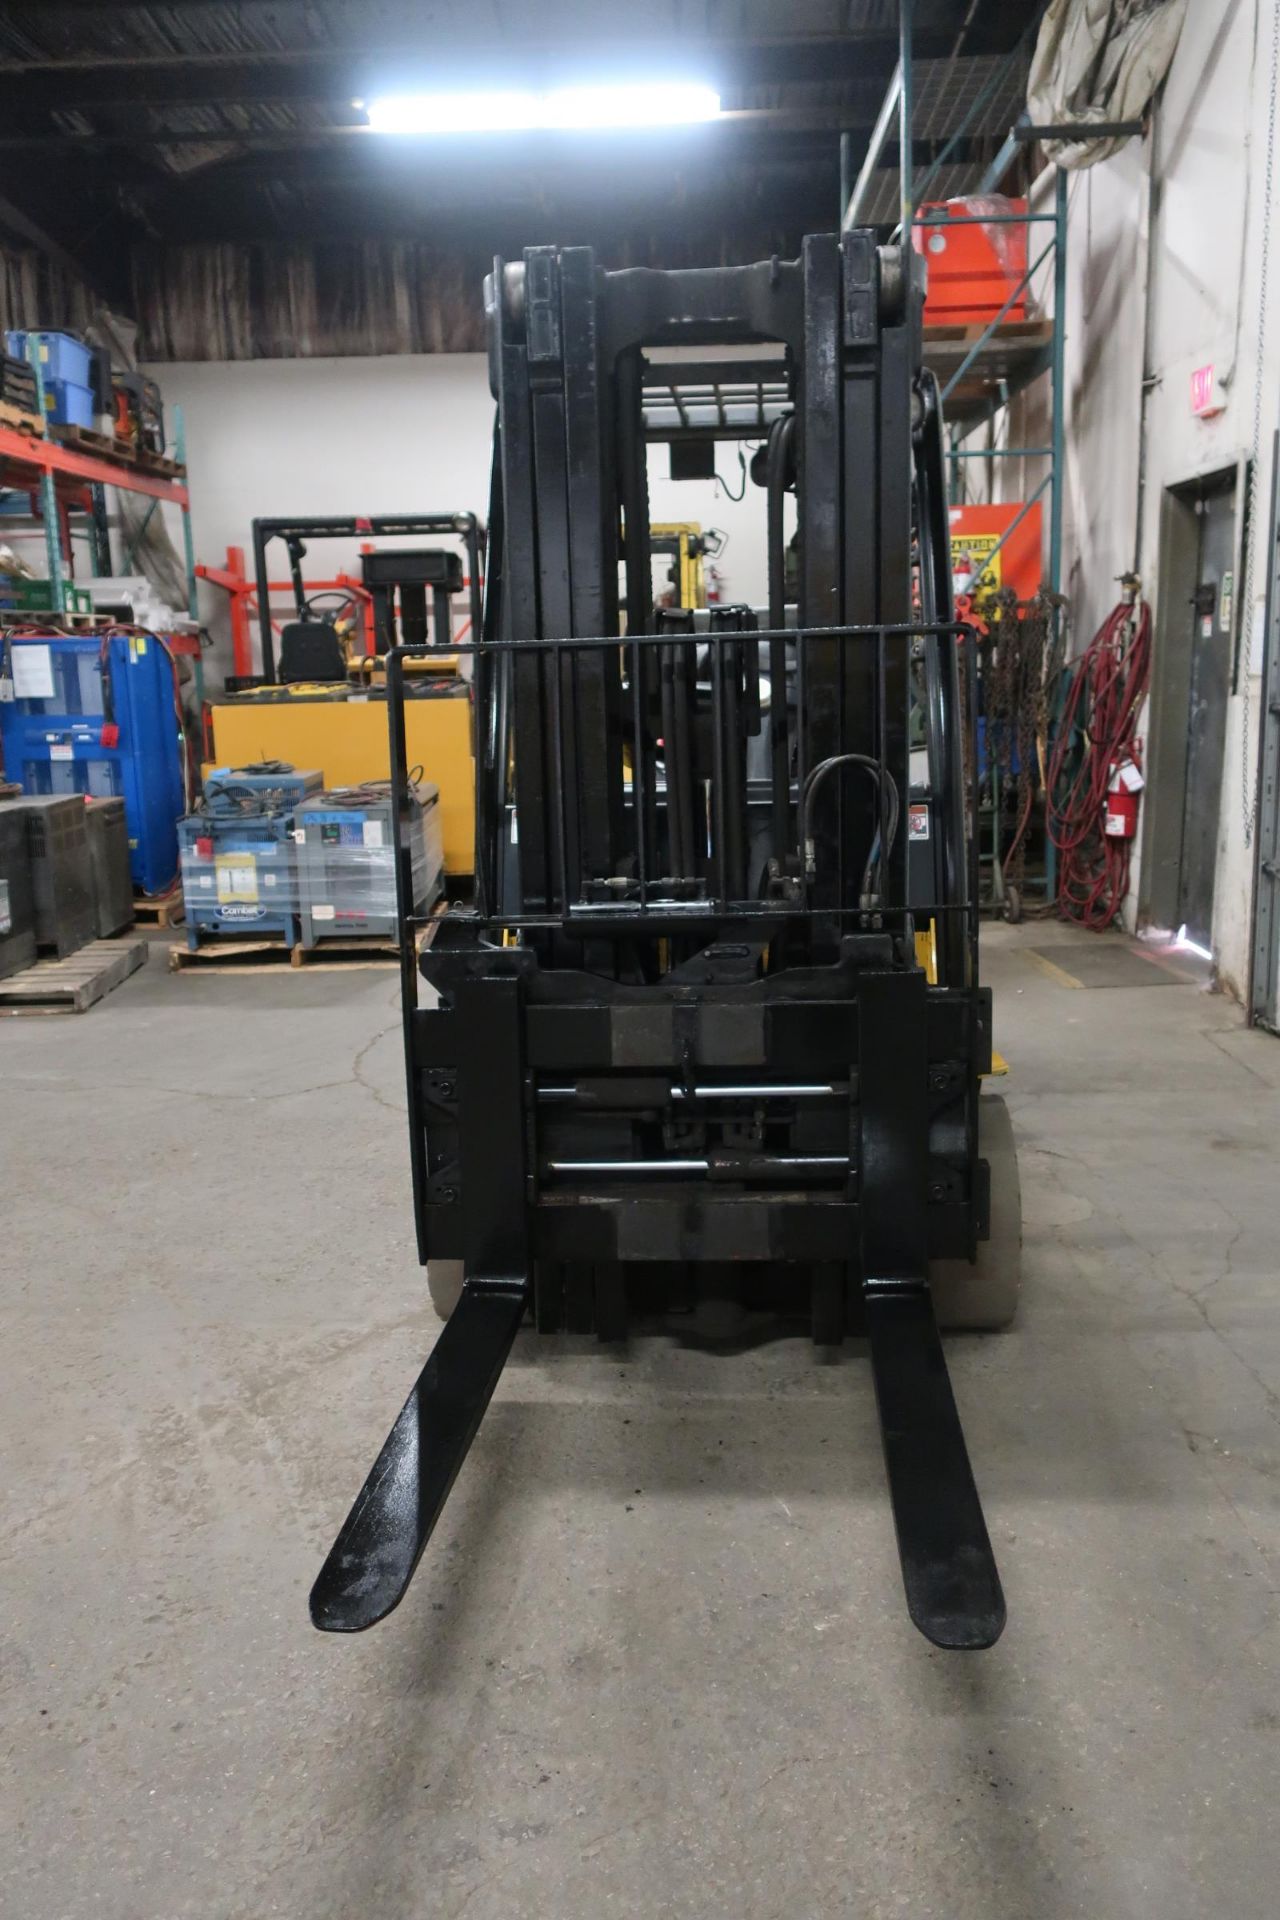 FREE CUSTOMS - 2015 Yale 8000lbs Capacity Forklift with 3-stage mast - LPG (propane) with - Image 2 of 2